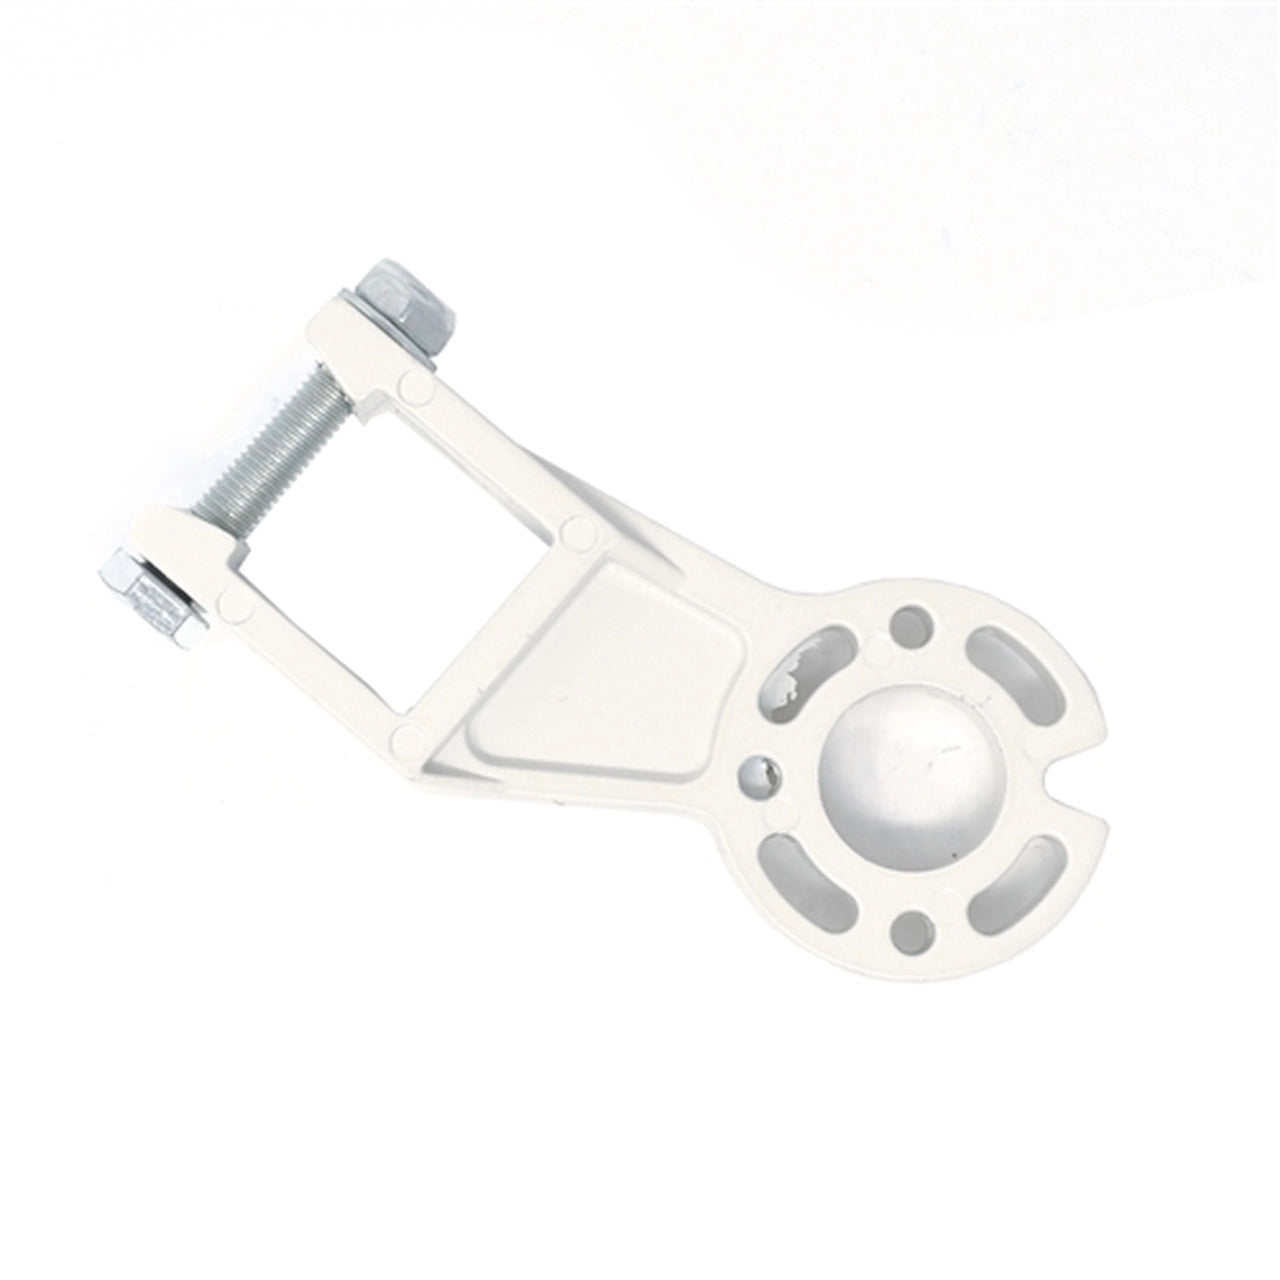 Aleko Support Bracket for Retractable Awning Gearbox - White